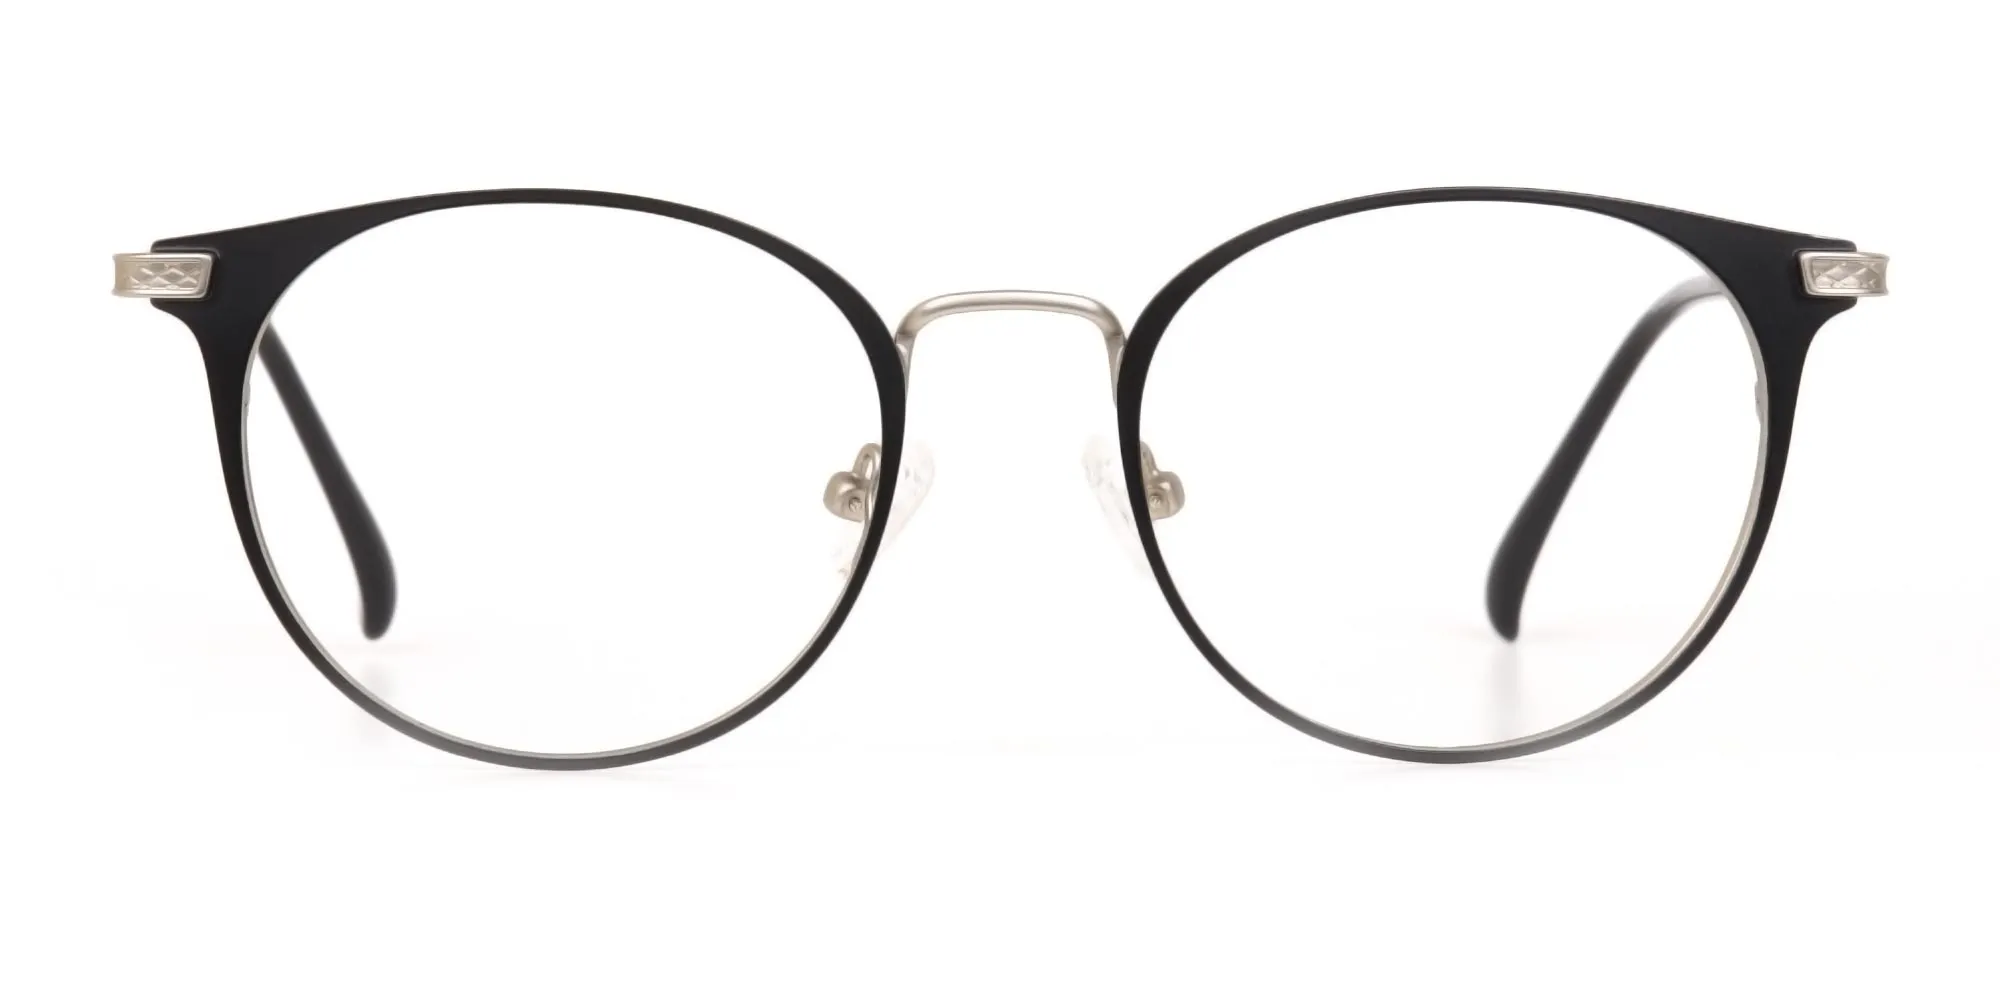 Matte Black and Silver Round Glasses Unisex -2